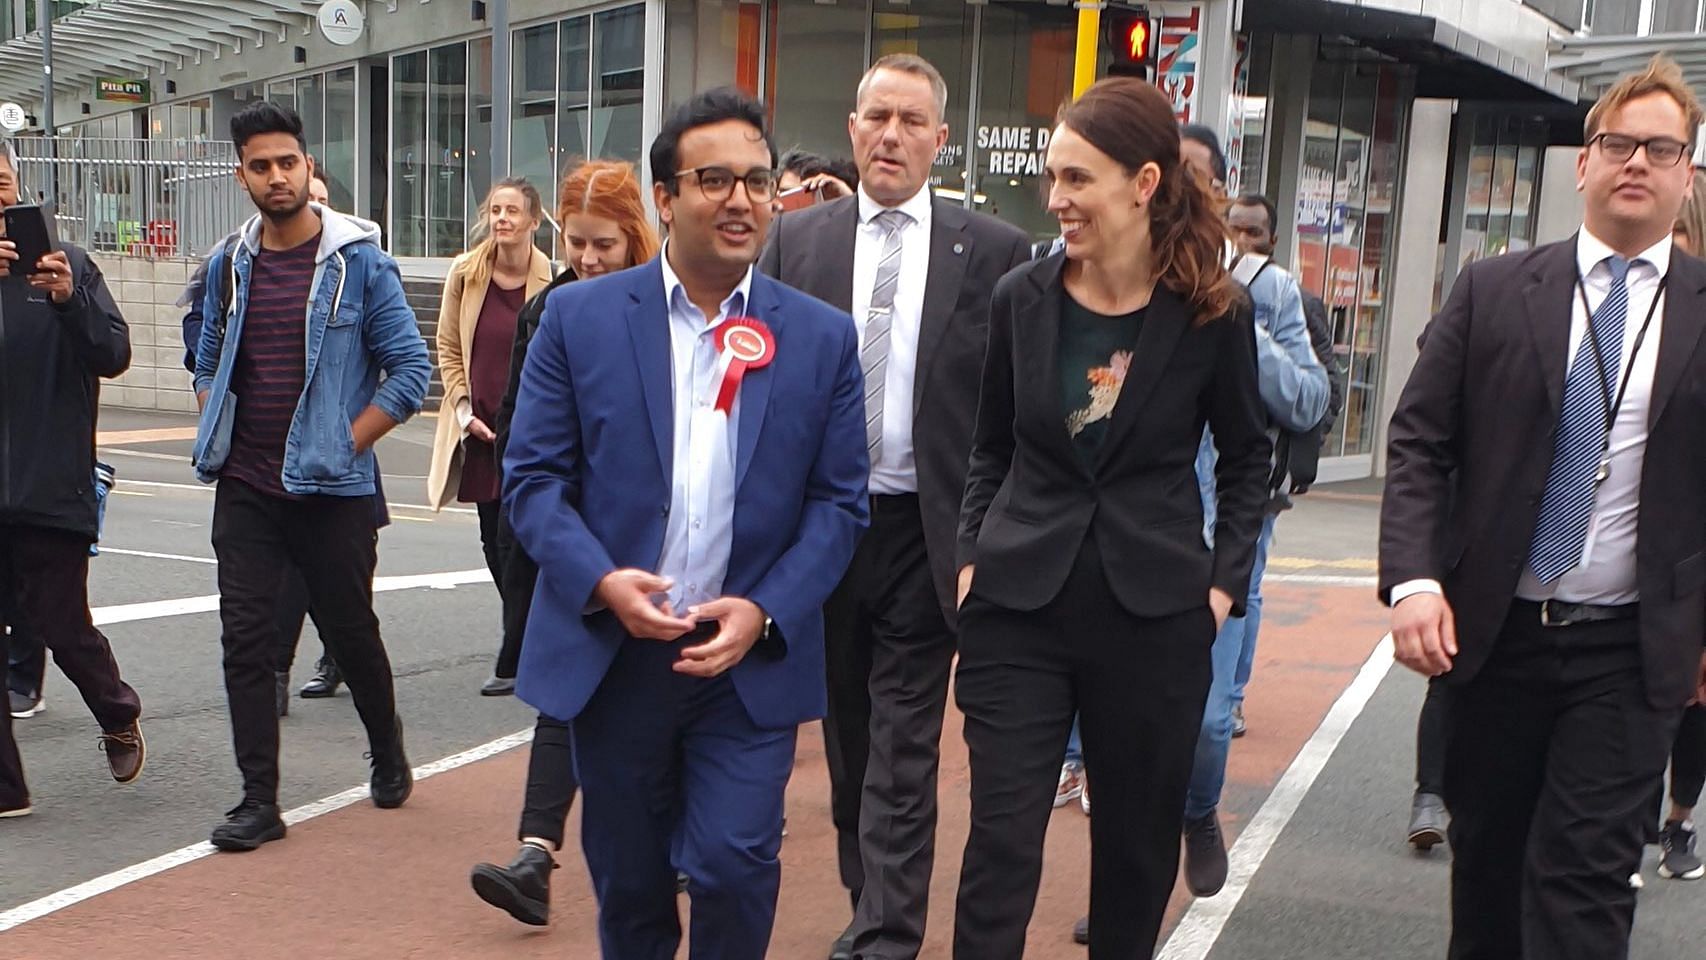 Defeating the candidate from the National Party with a margin of 4,425 votes, Dr Gaurav Sharma won from the Hamilton West electorate.